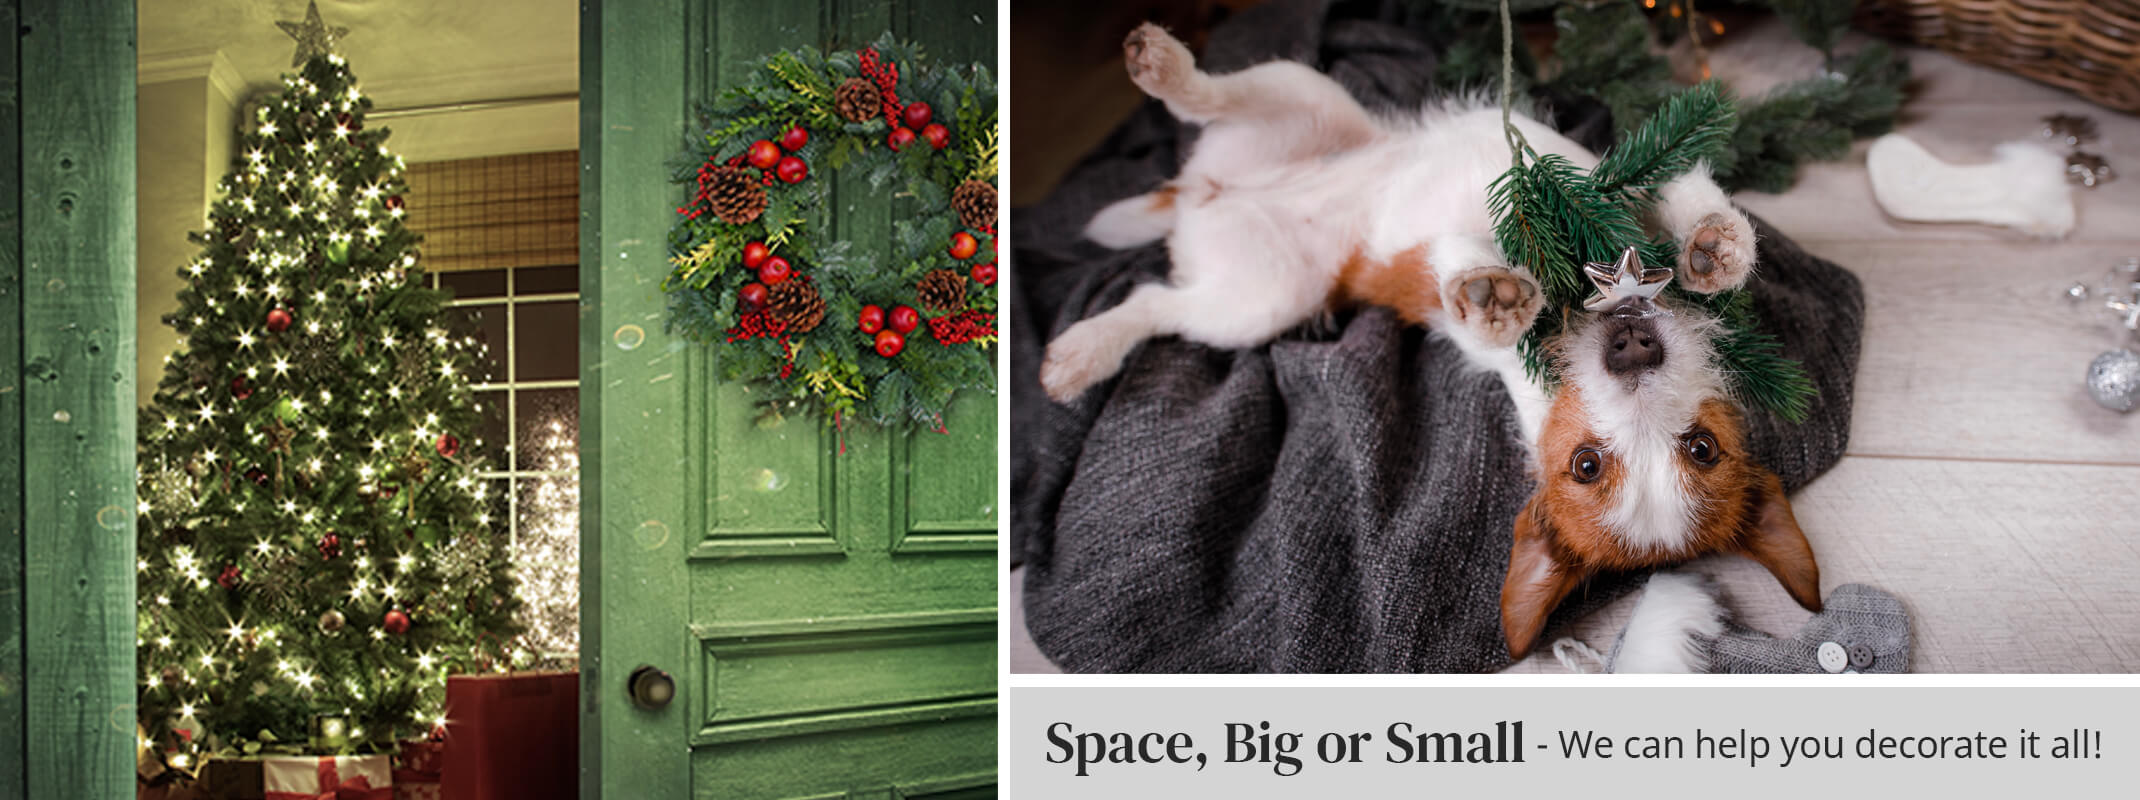 holiday two images with the first being a christmas tree in the doorway and on that door is a holiday wreath.  The second image is a cute little dog playing with a faux evergreen branch and underneath are the words space, big or small we can help you decorate it all